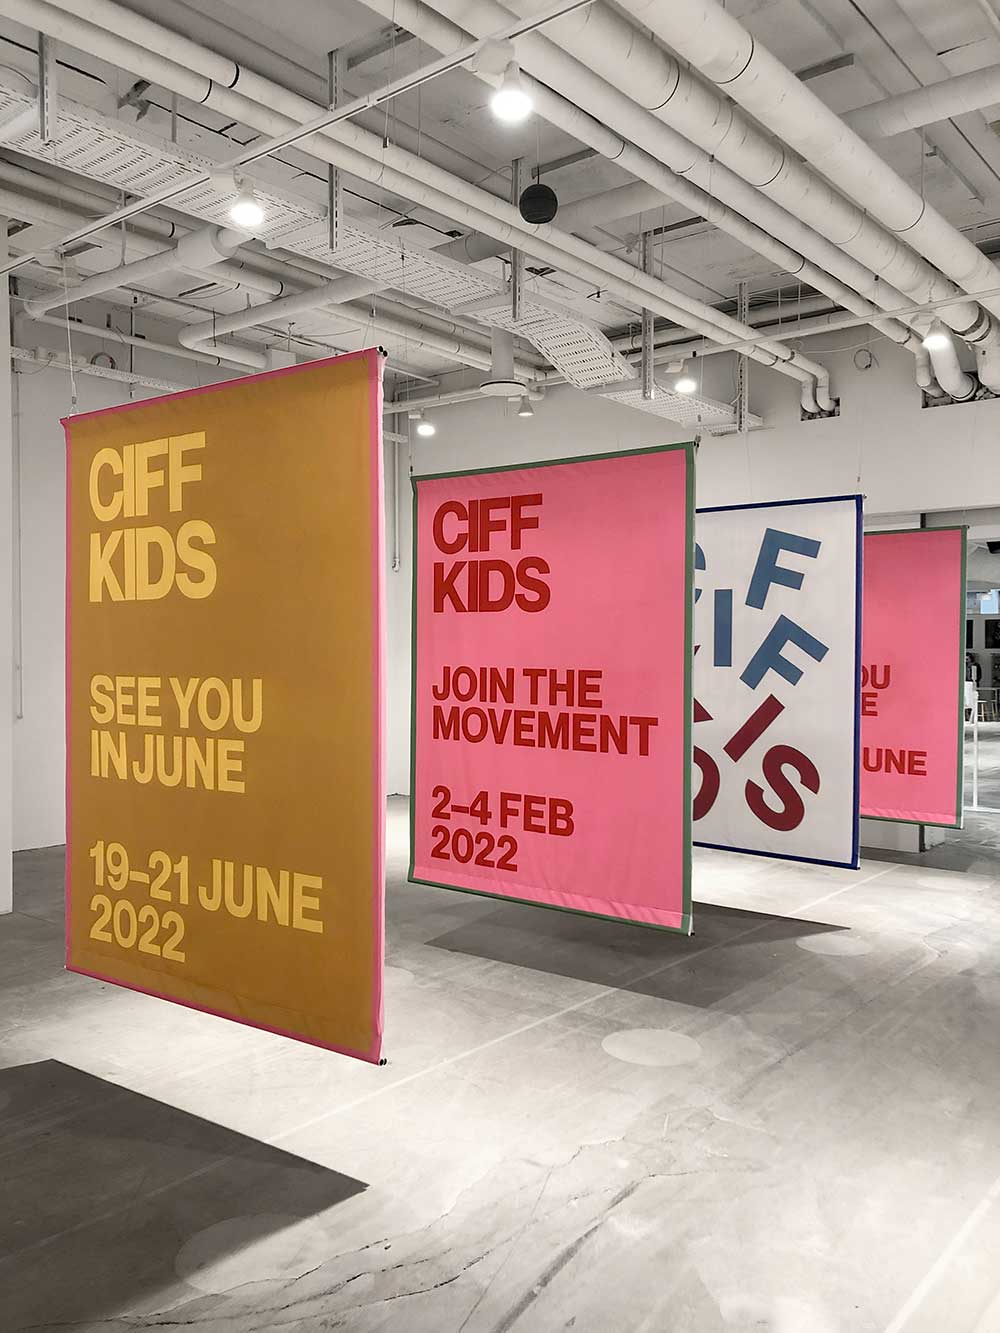 CIFF Kids Banners hanging from the ceiling